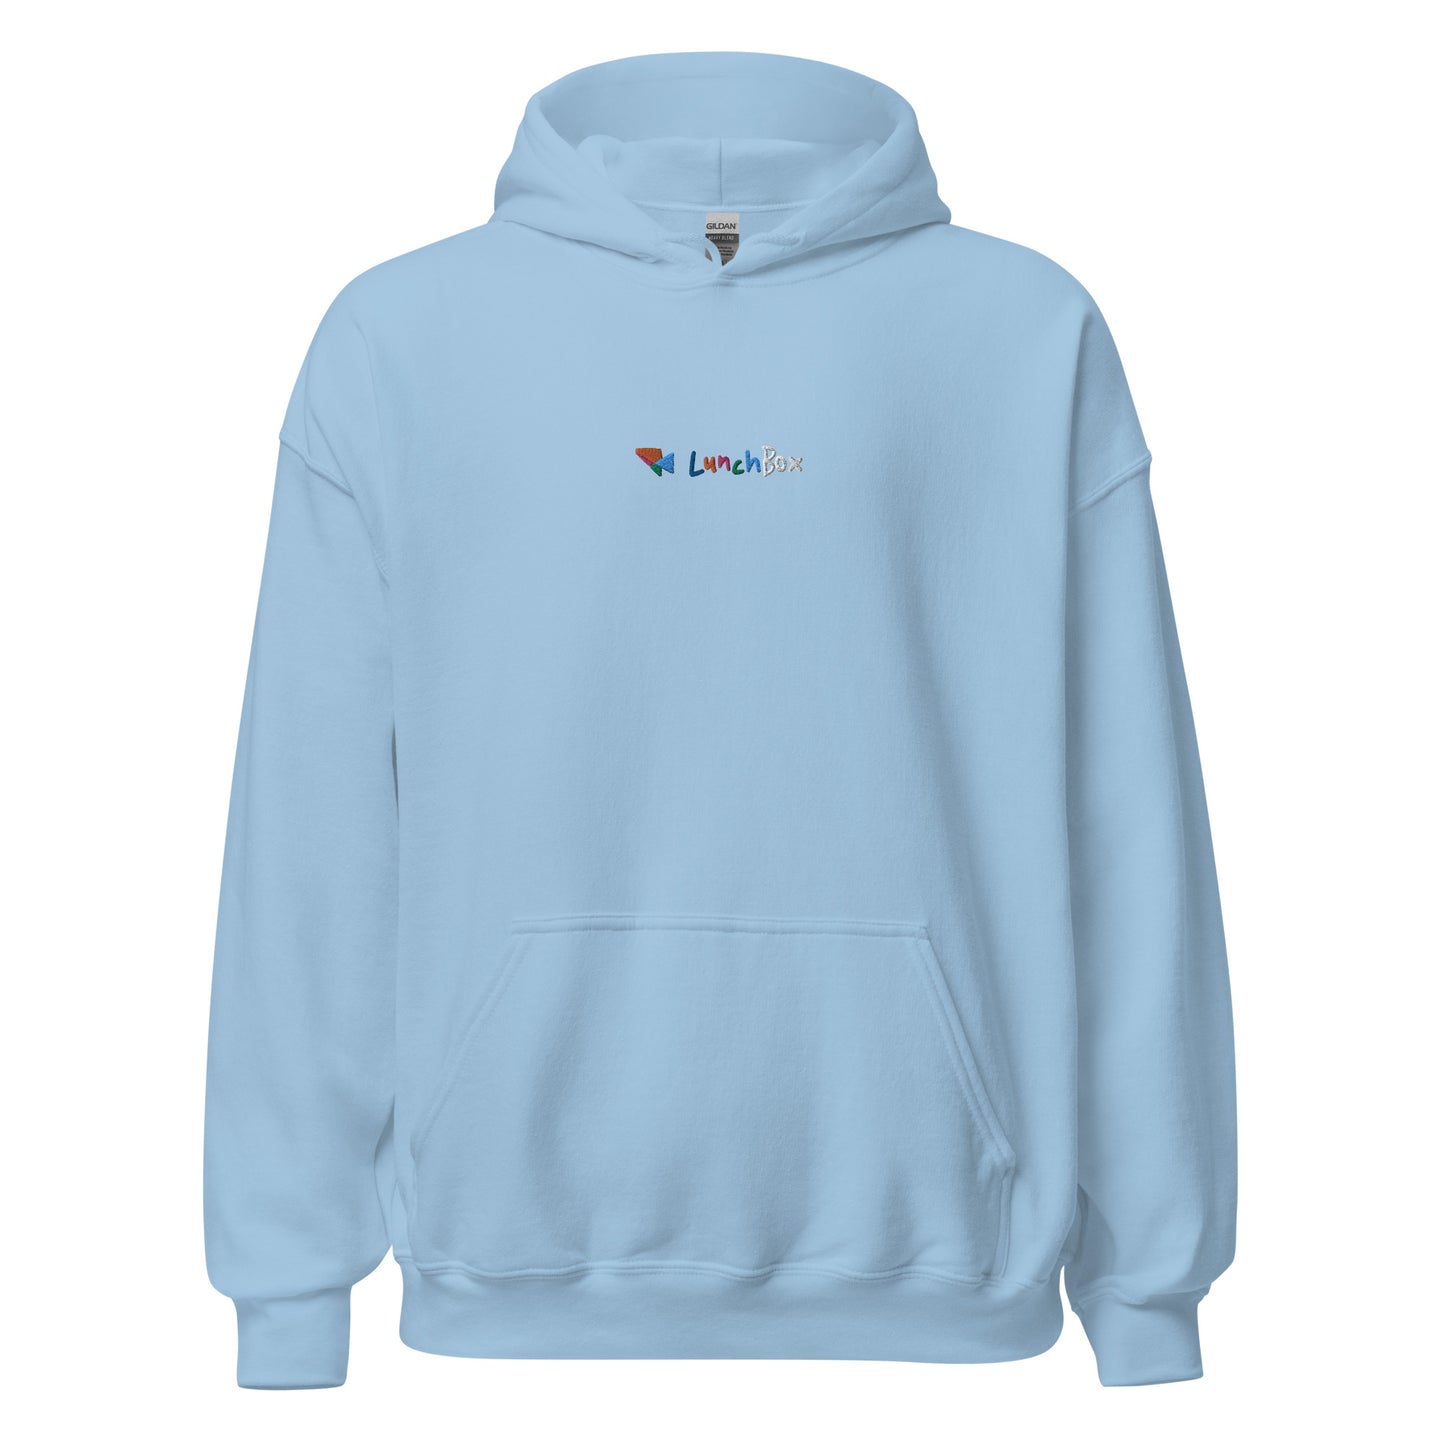 LunchBox Embroidered Hoodie